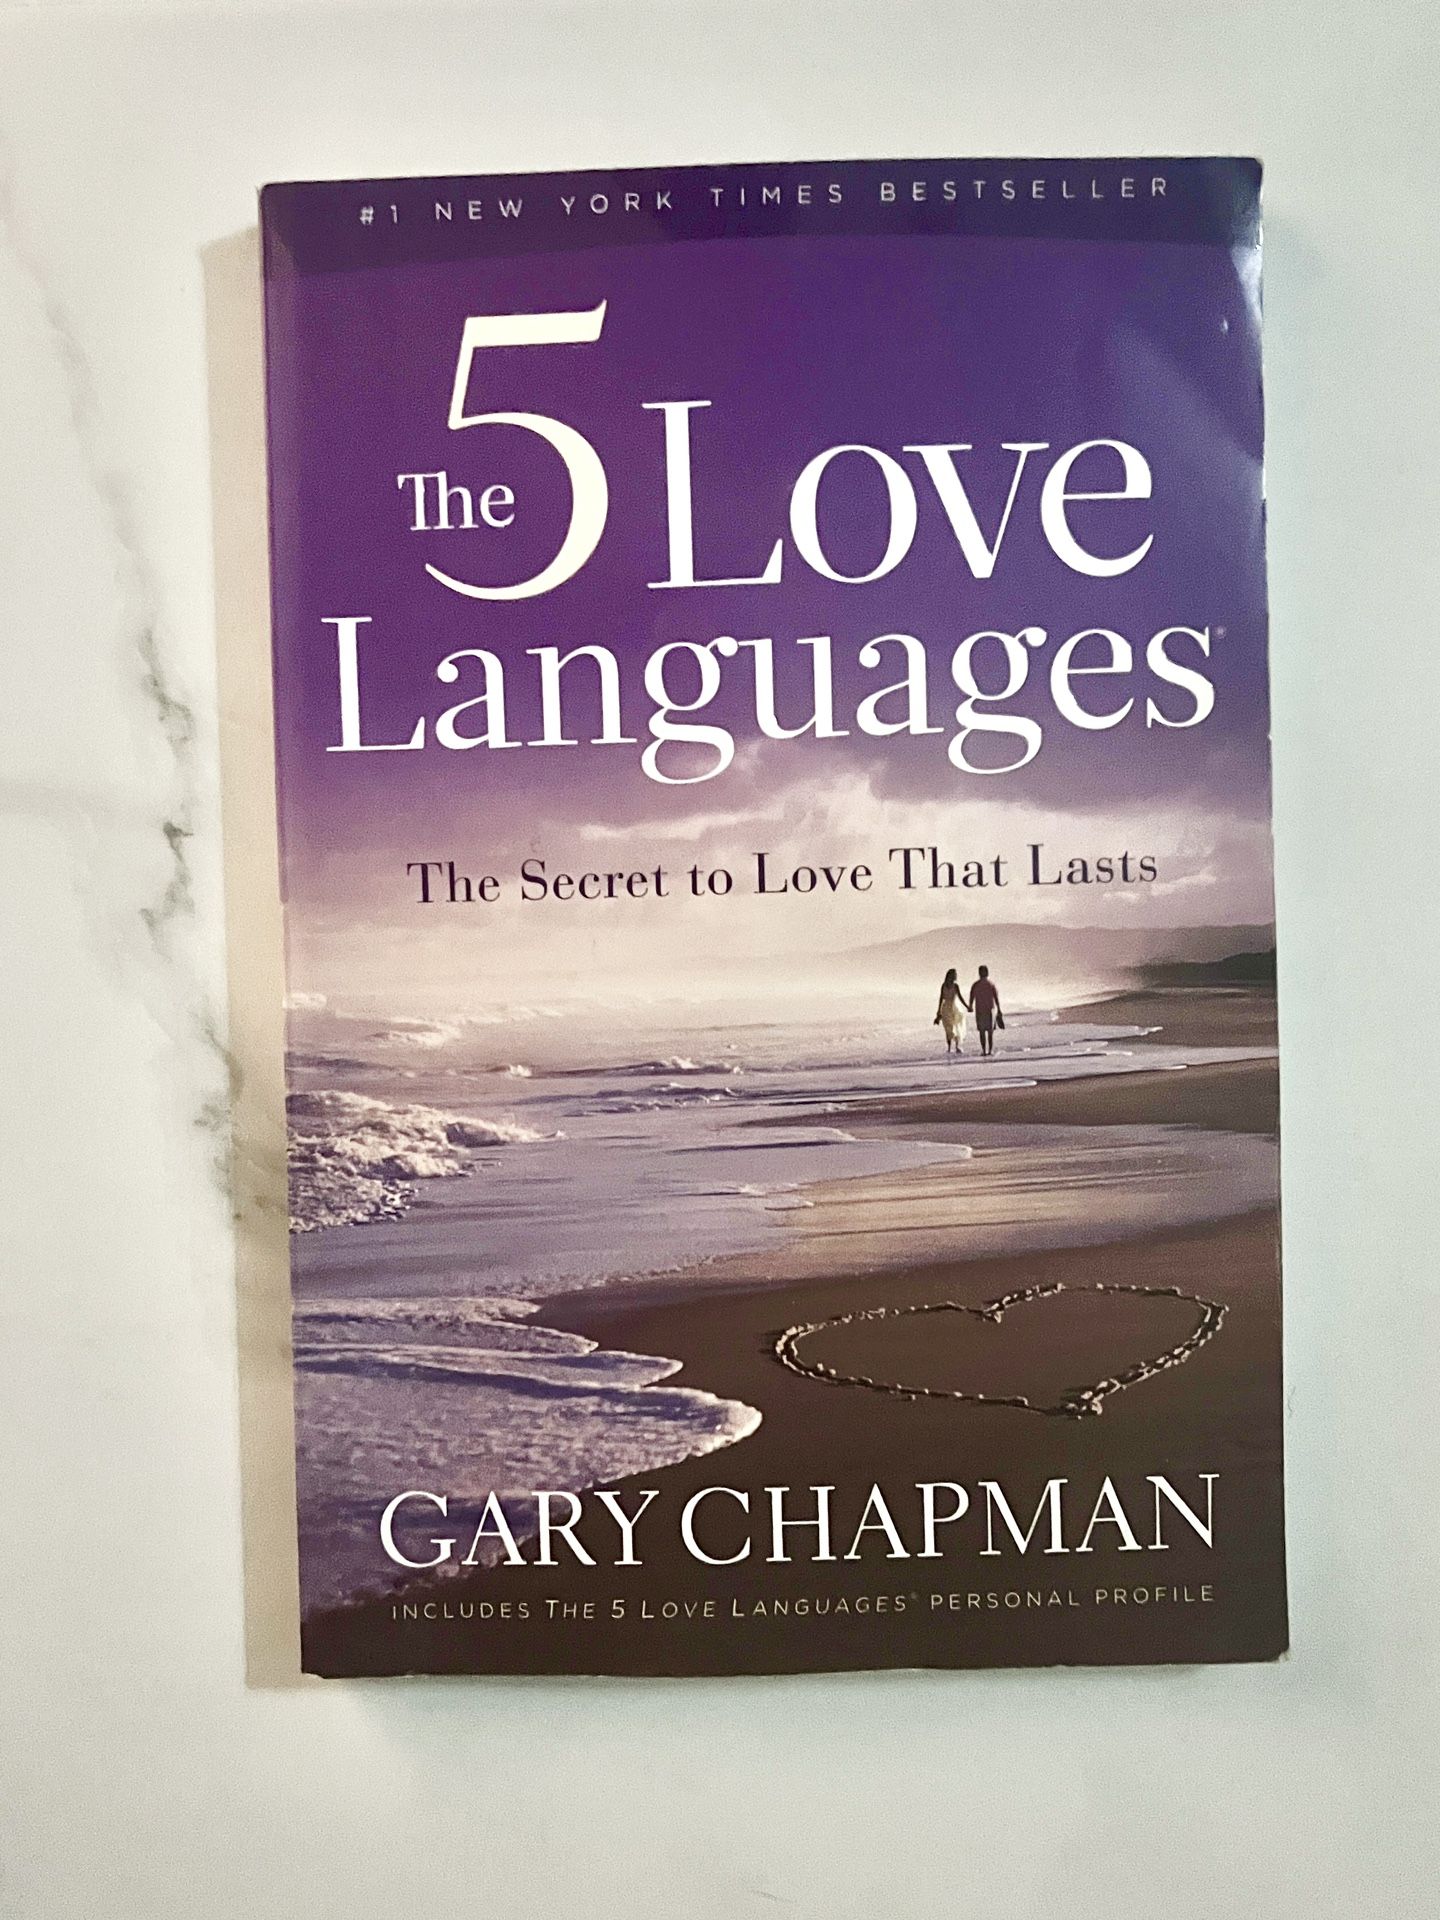 The 5 Love Languages - The Secret to Love that Lasts